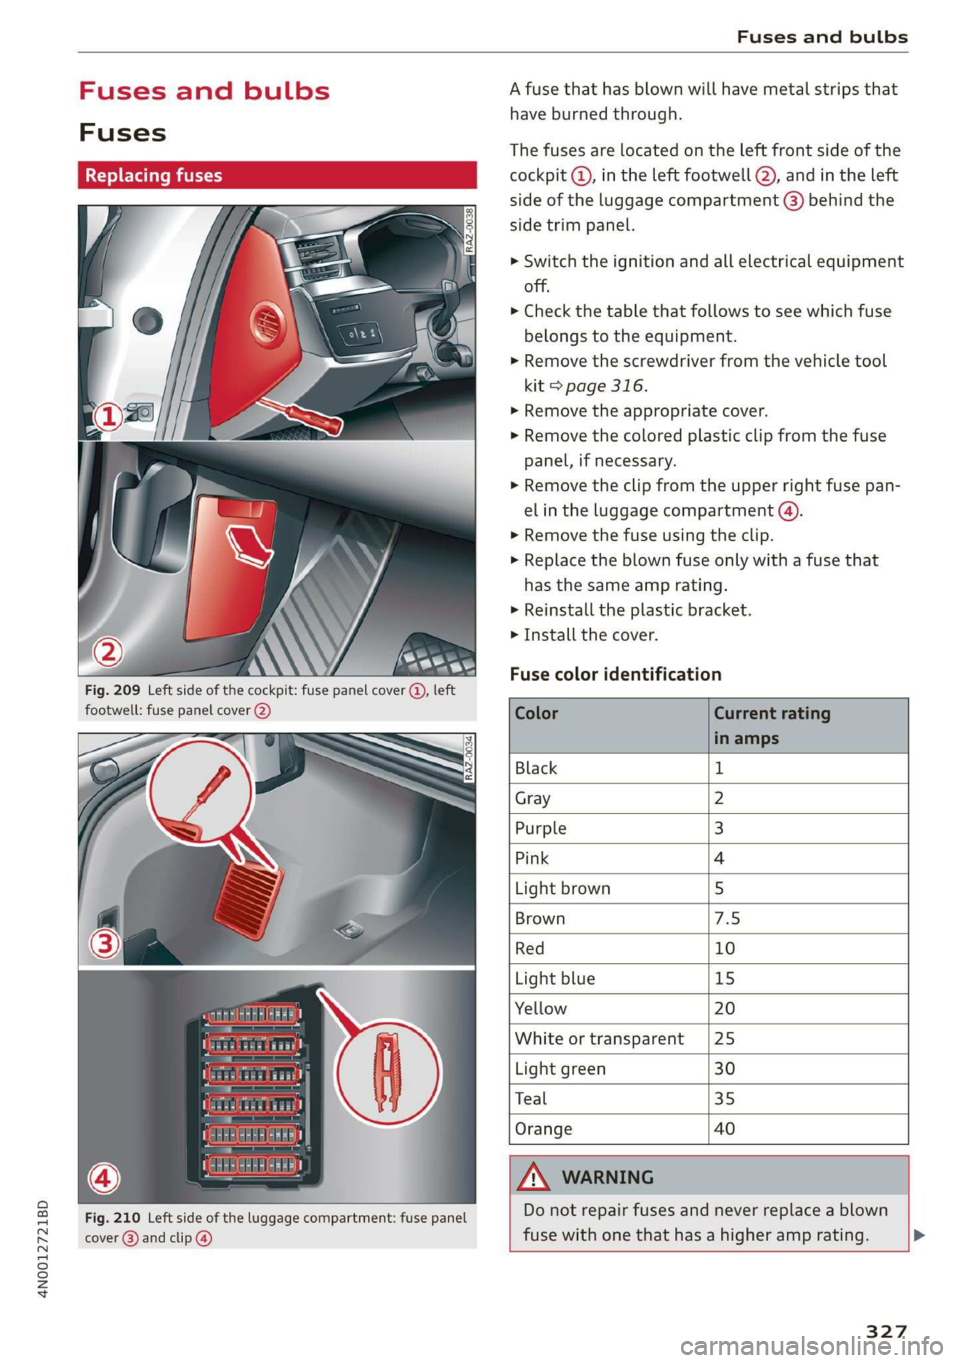 AUDI A8 2020  Owners Manual 4N0012721BD 
Fuses and bulbs 
  
  
  
  
Fig. 209 Left side of the cockpit: fuse panel cover (), left 
footwell: fuse panel cover @) 
  
  
Fig. 210 Left side of the luggage compartment: fuse panel 
